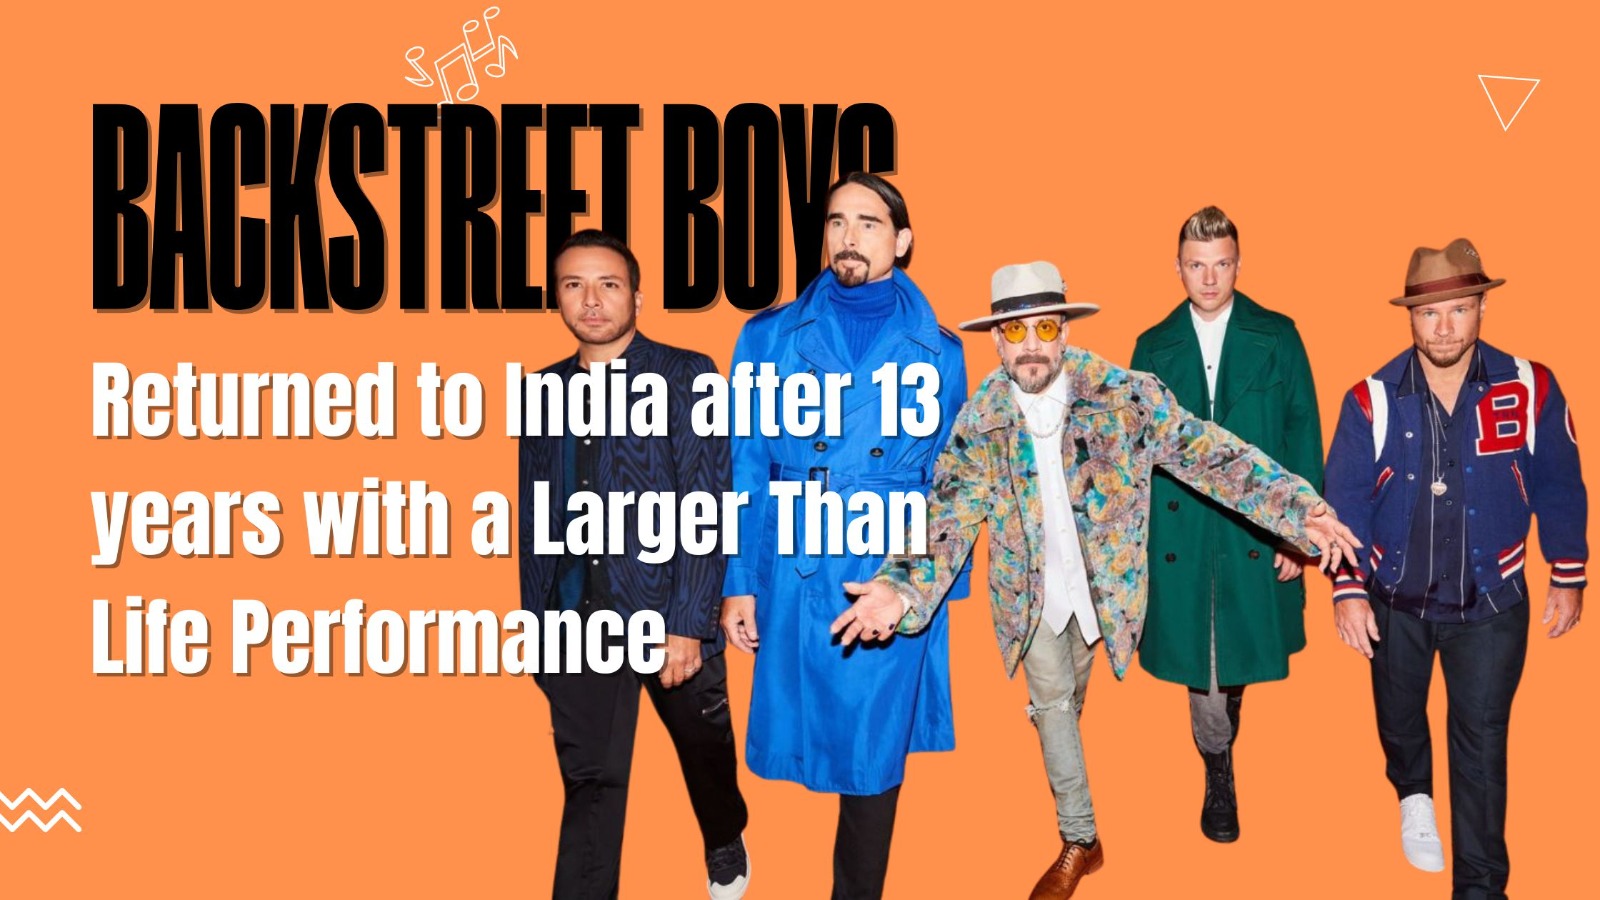 Backstreet Boys Returned to India after 13 years with a Larger Than Life Performance